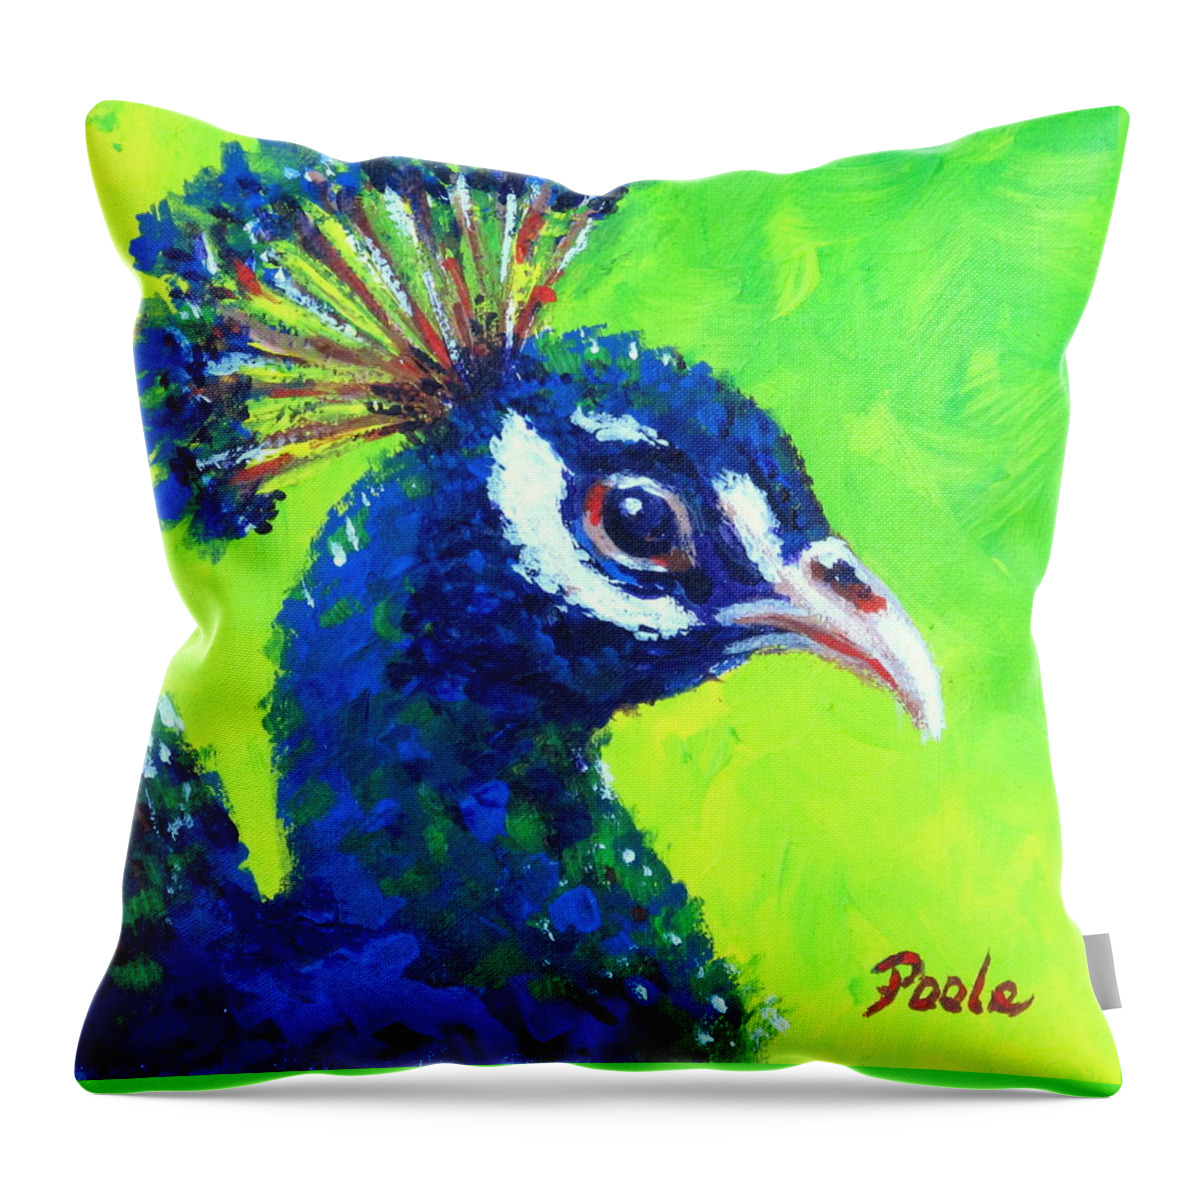 Peacock Throw Pillow featuring the painting Peacock Portrait by Pamela Poole